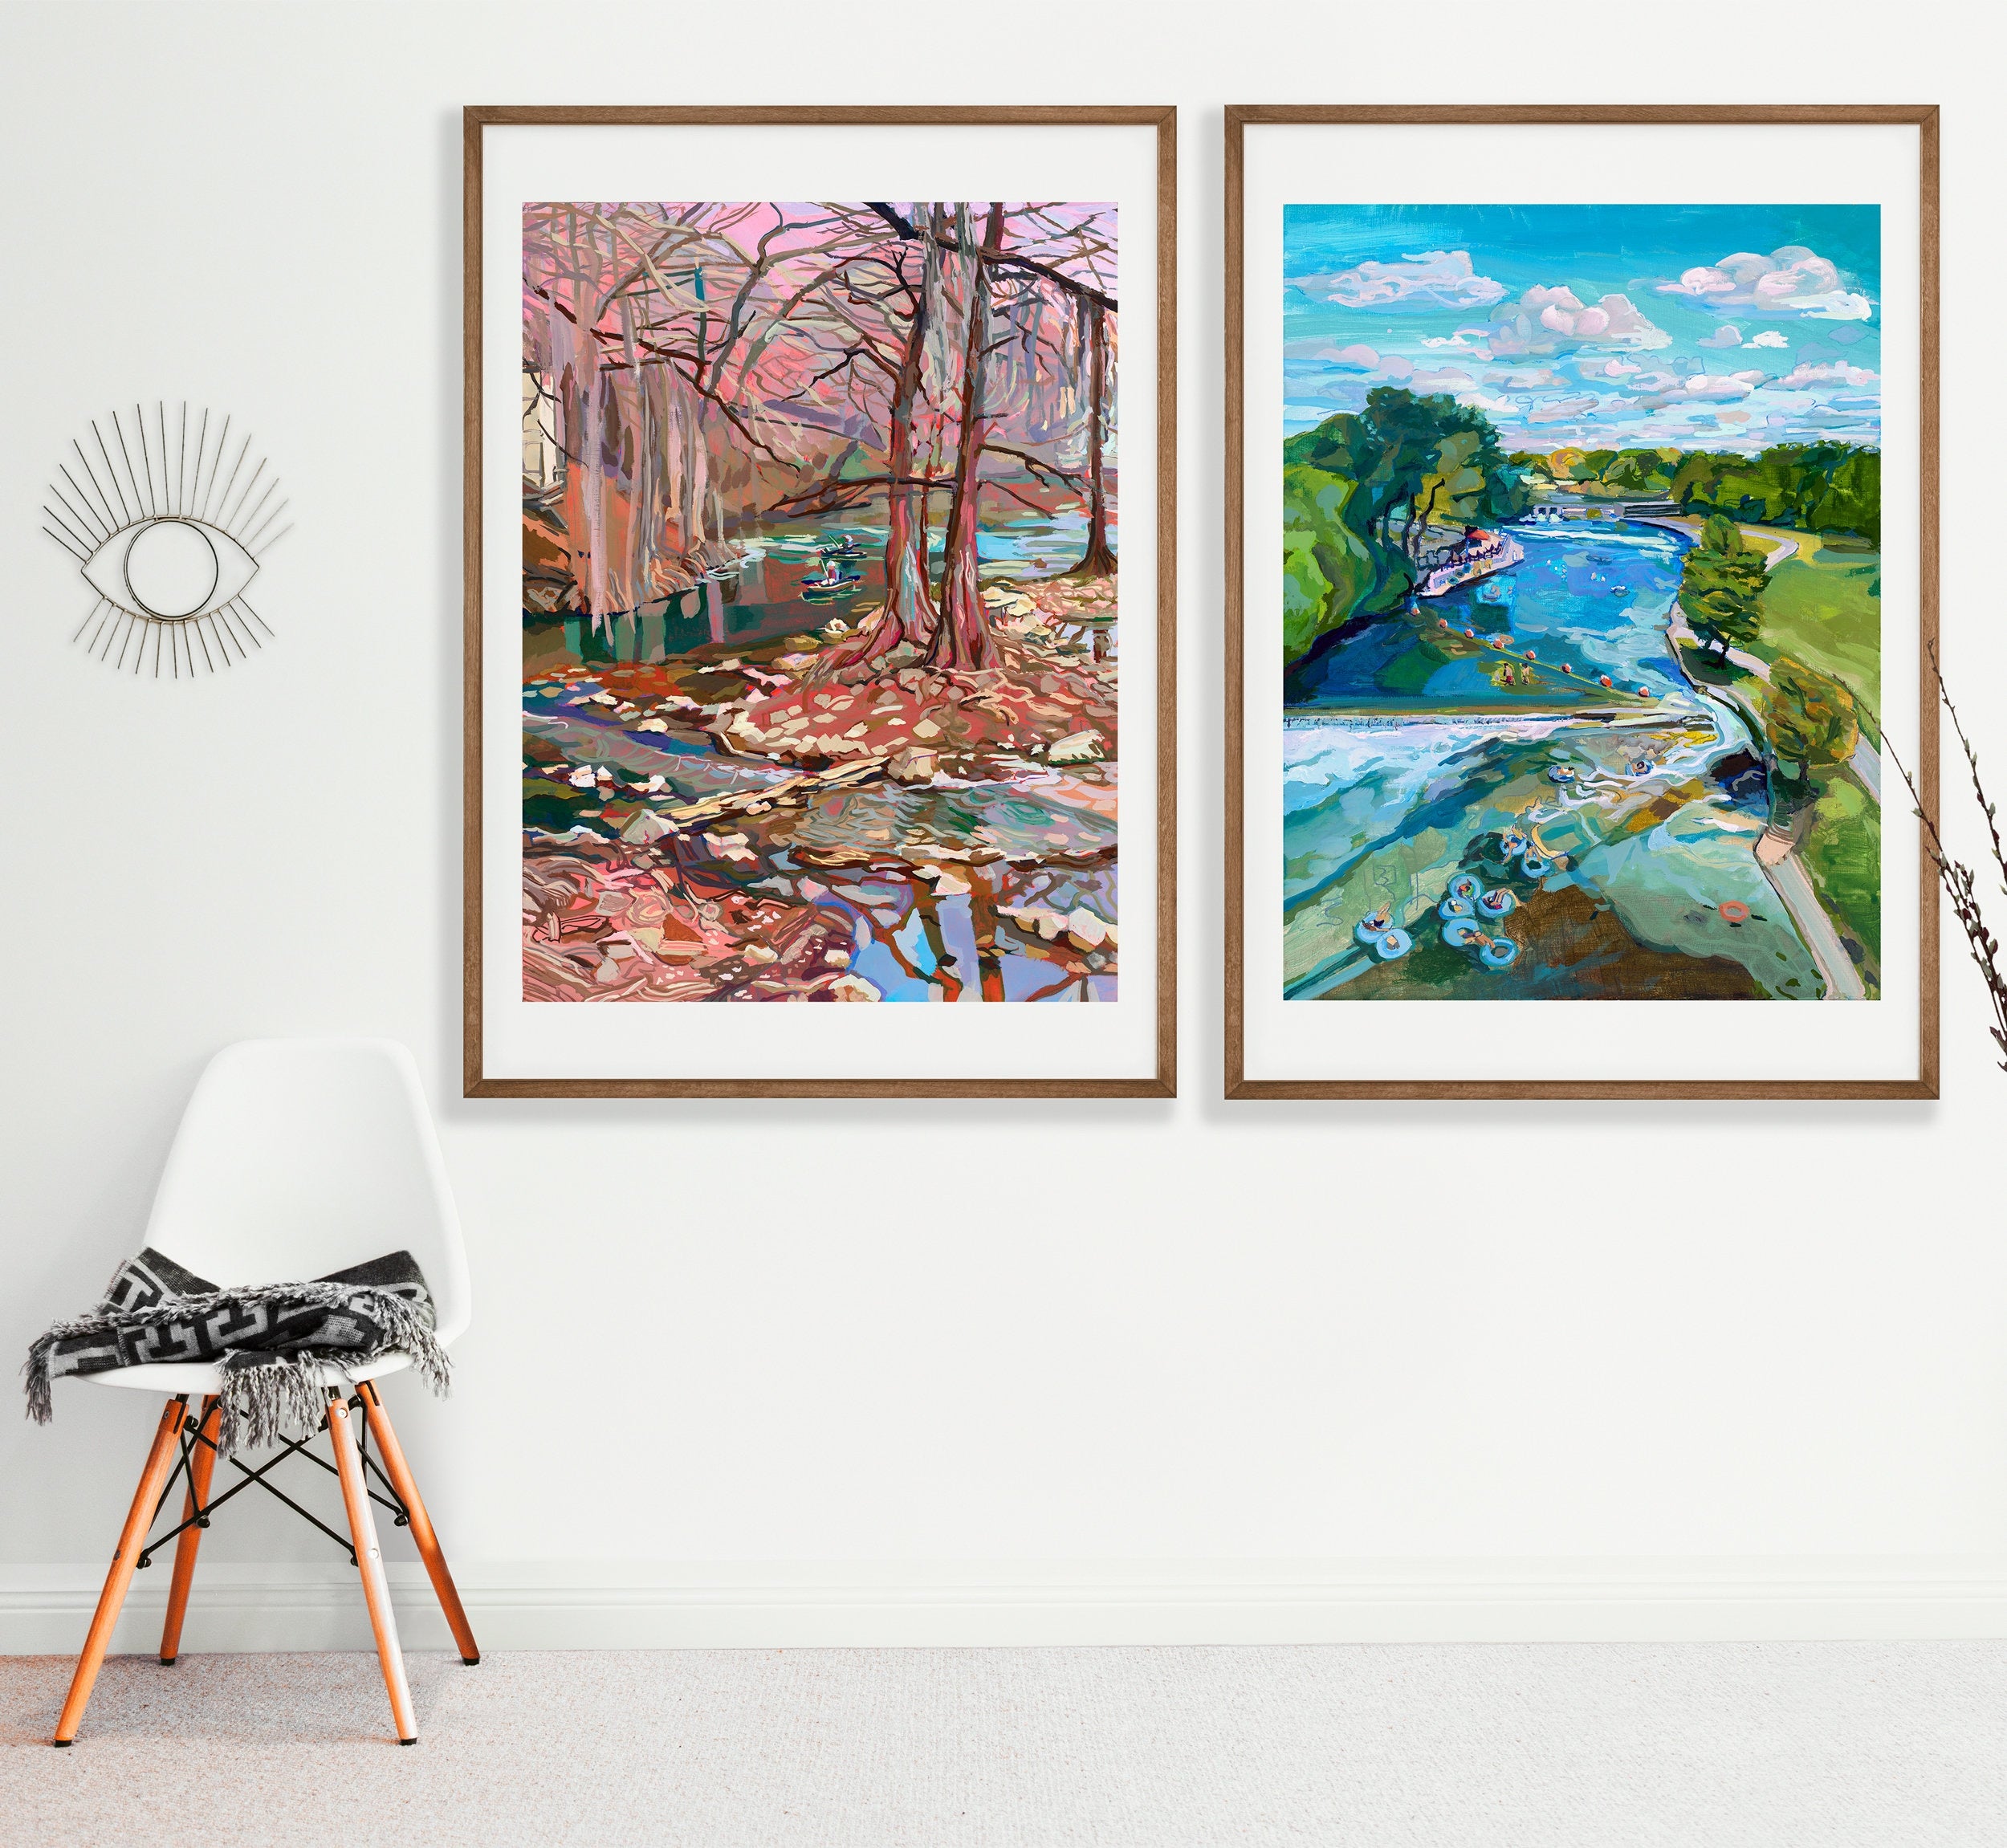 Texas Guadalupe River Art Print. Texas River and Cypress Trees in Texas Hill Country Landscape Print